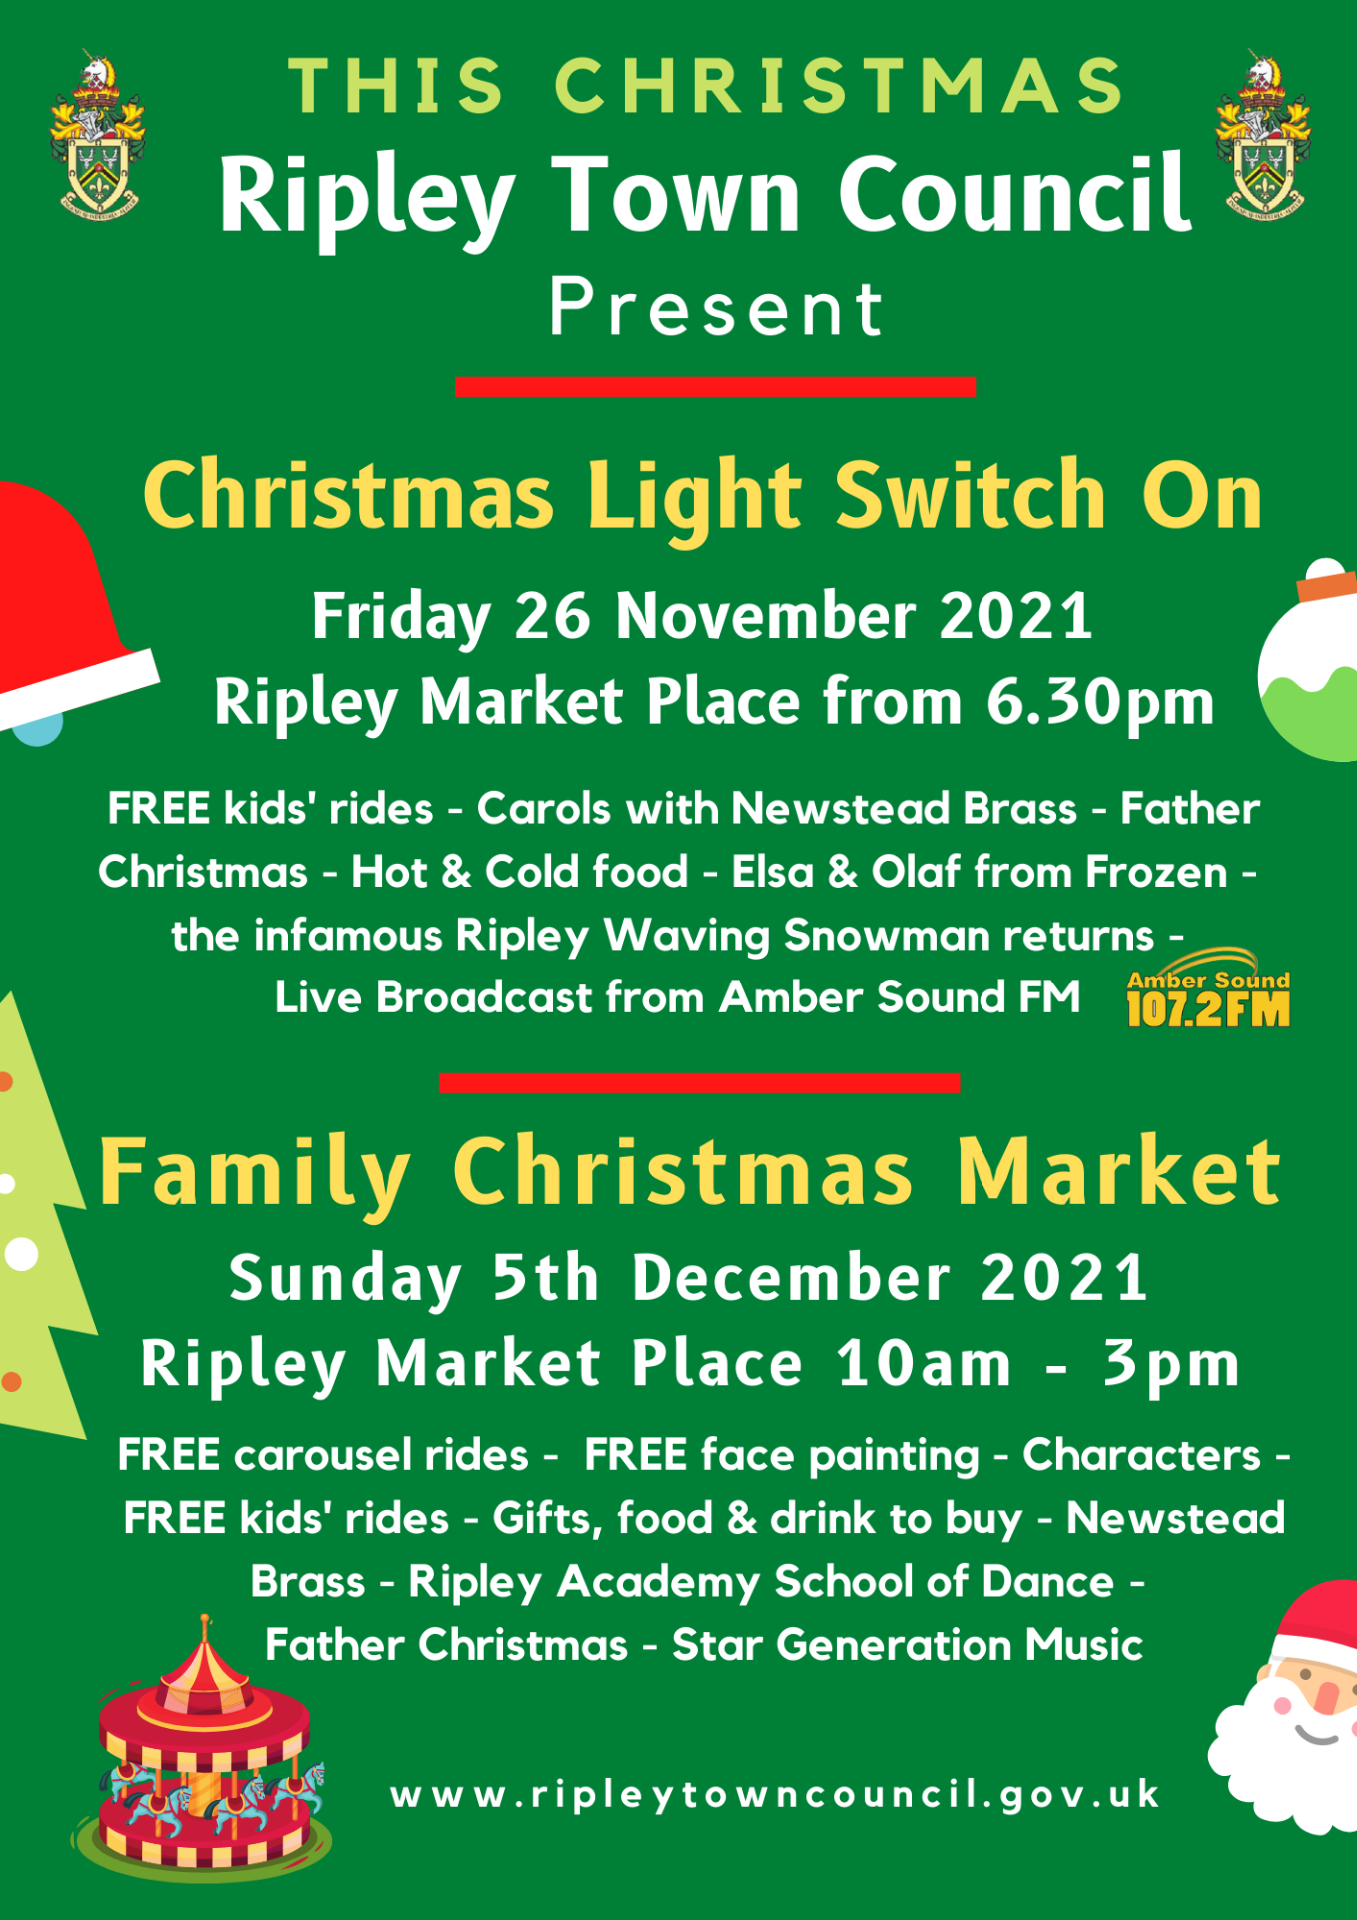 Ripley Christmas event information on a green background with festive images around the page